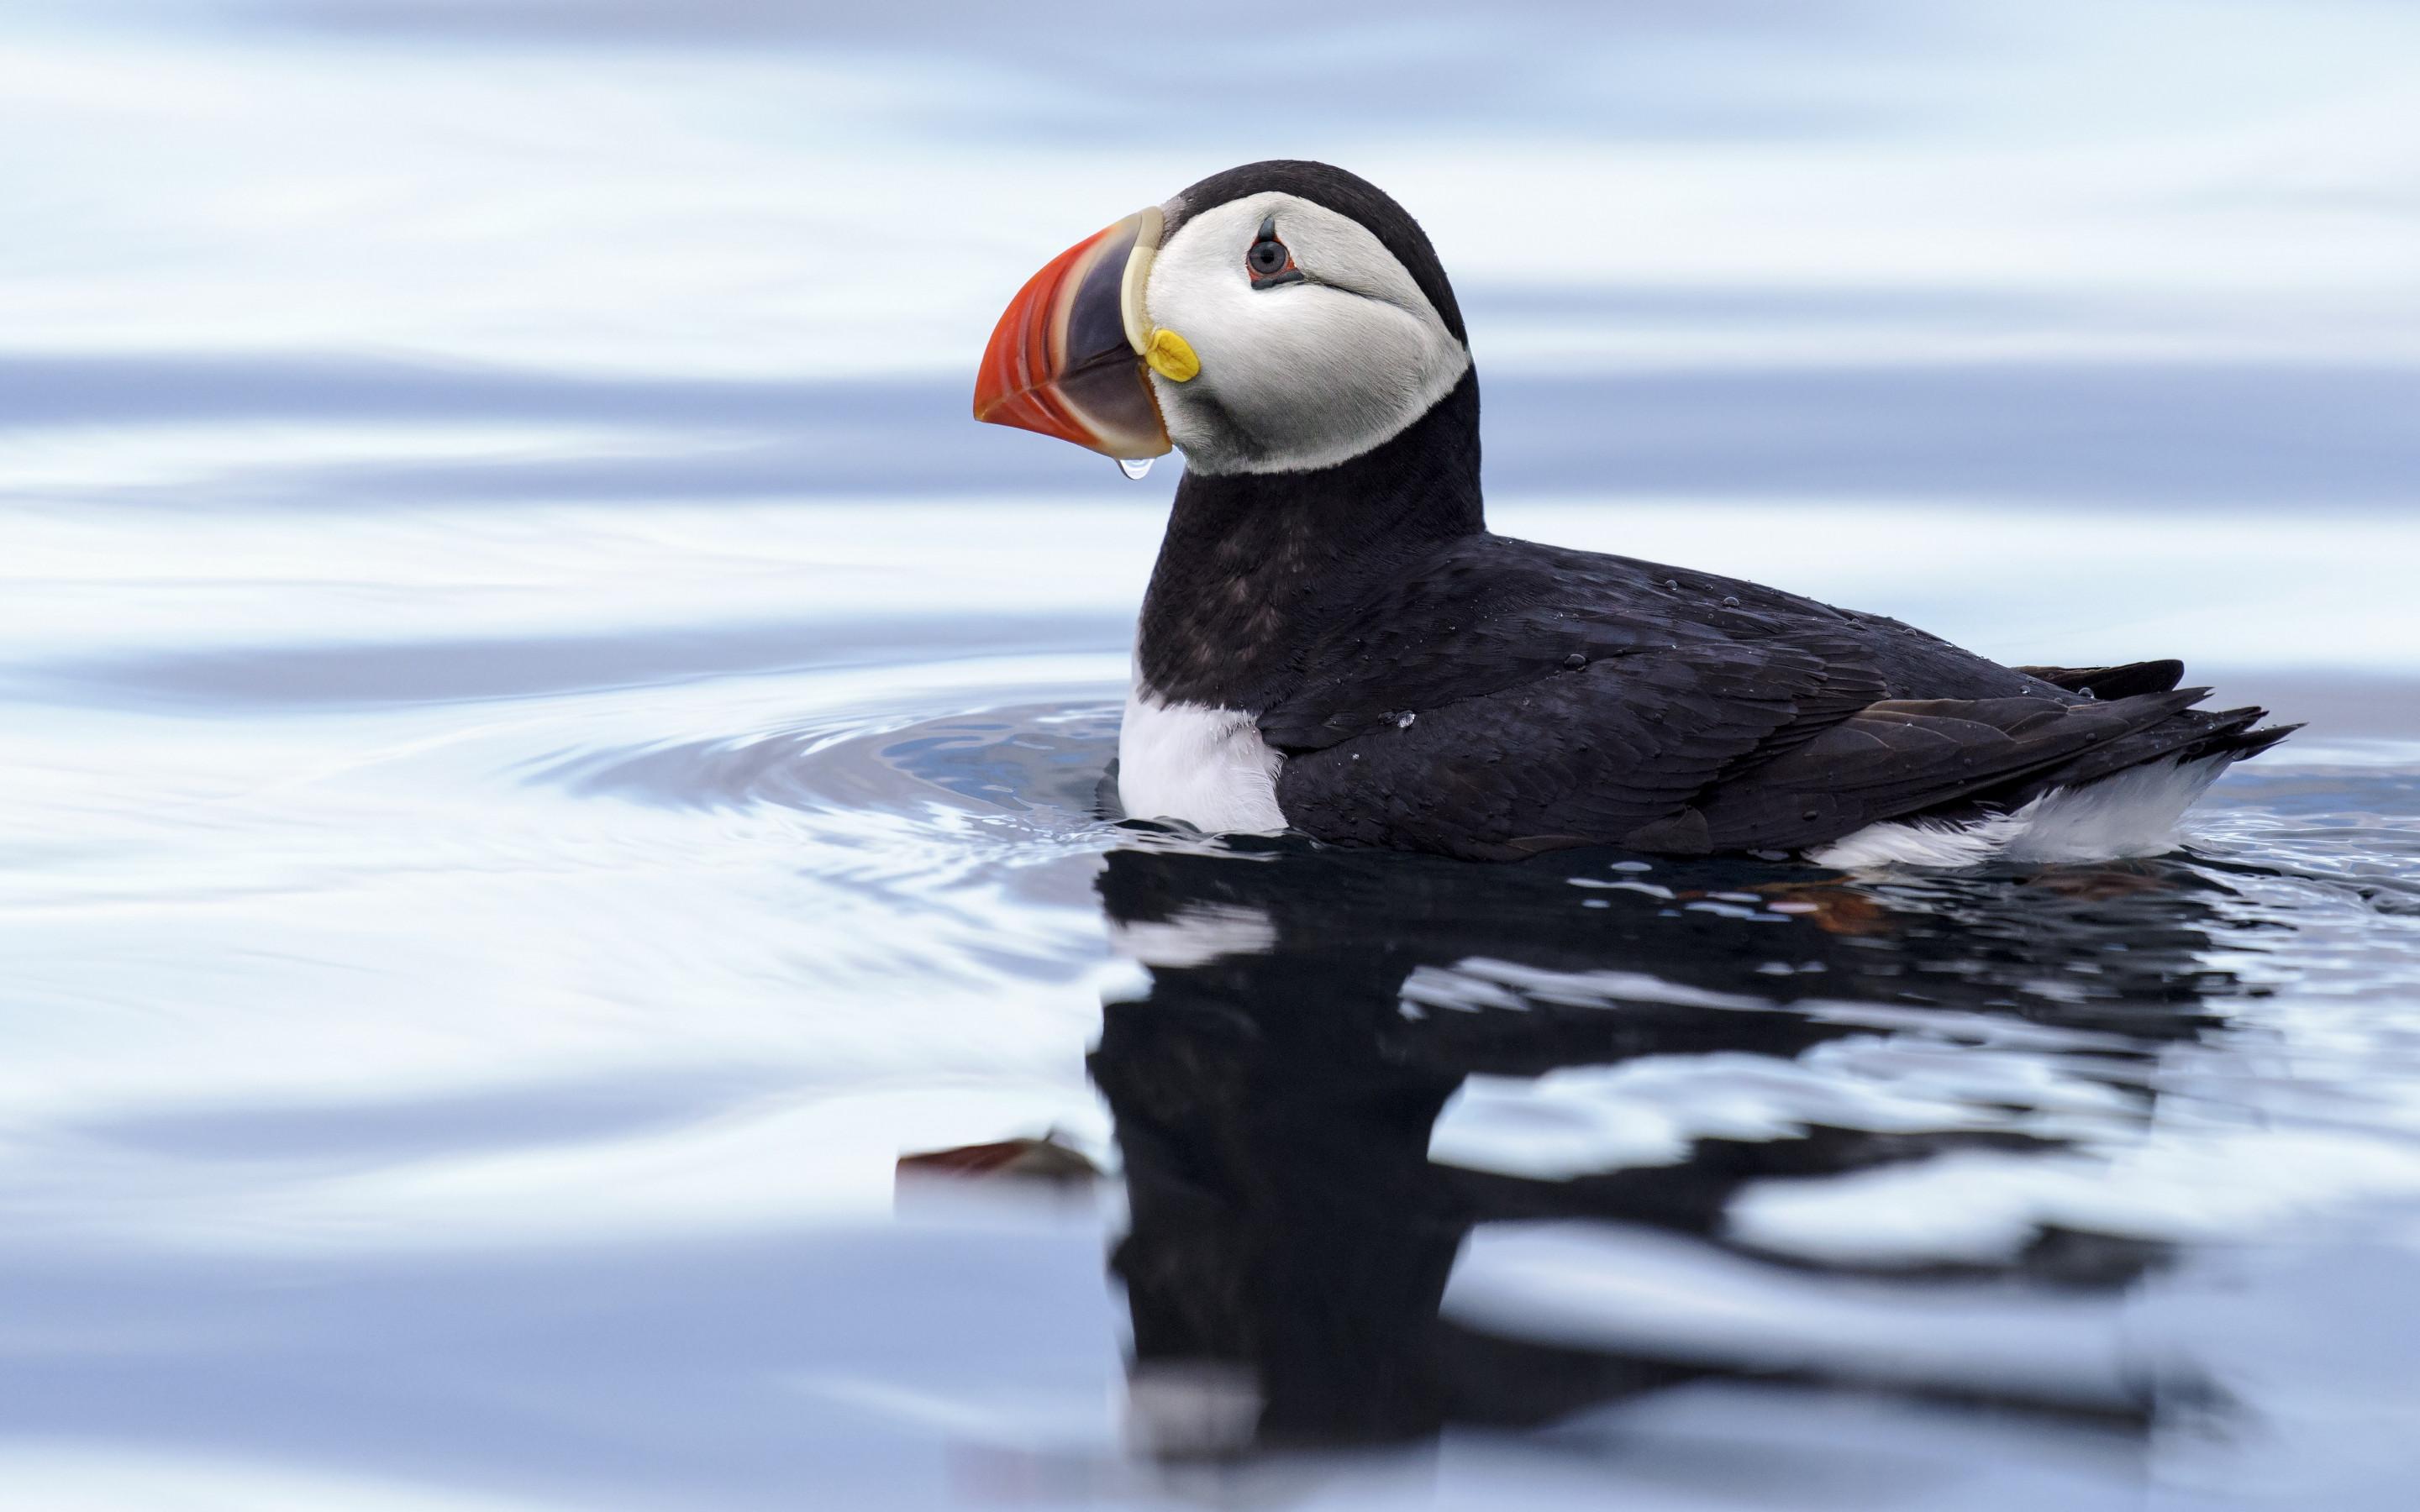 Download wallpaper: Puffin in Svalbard 2880x1800